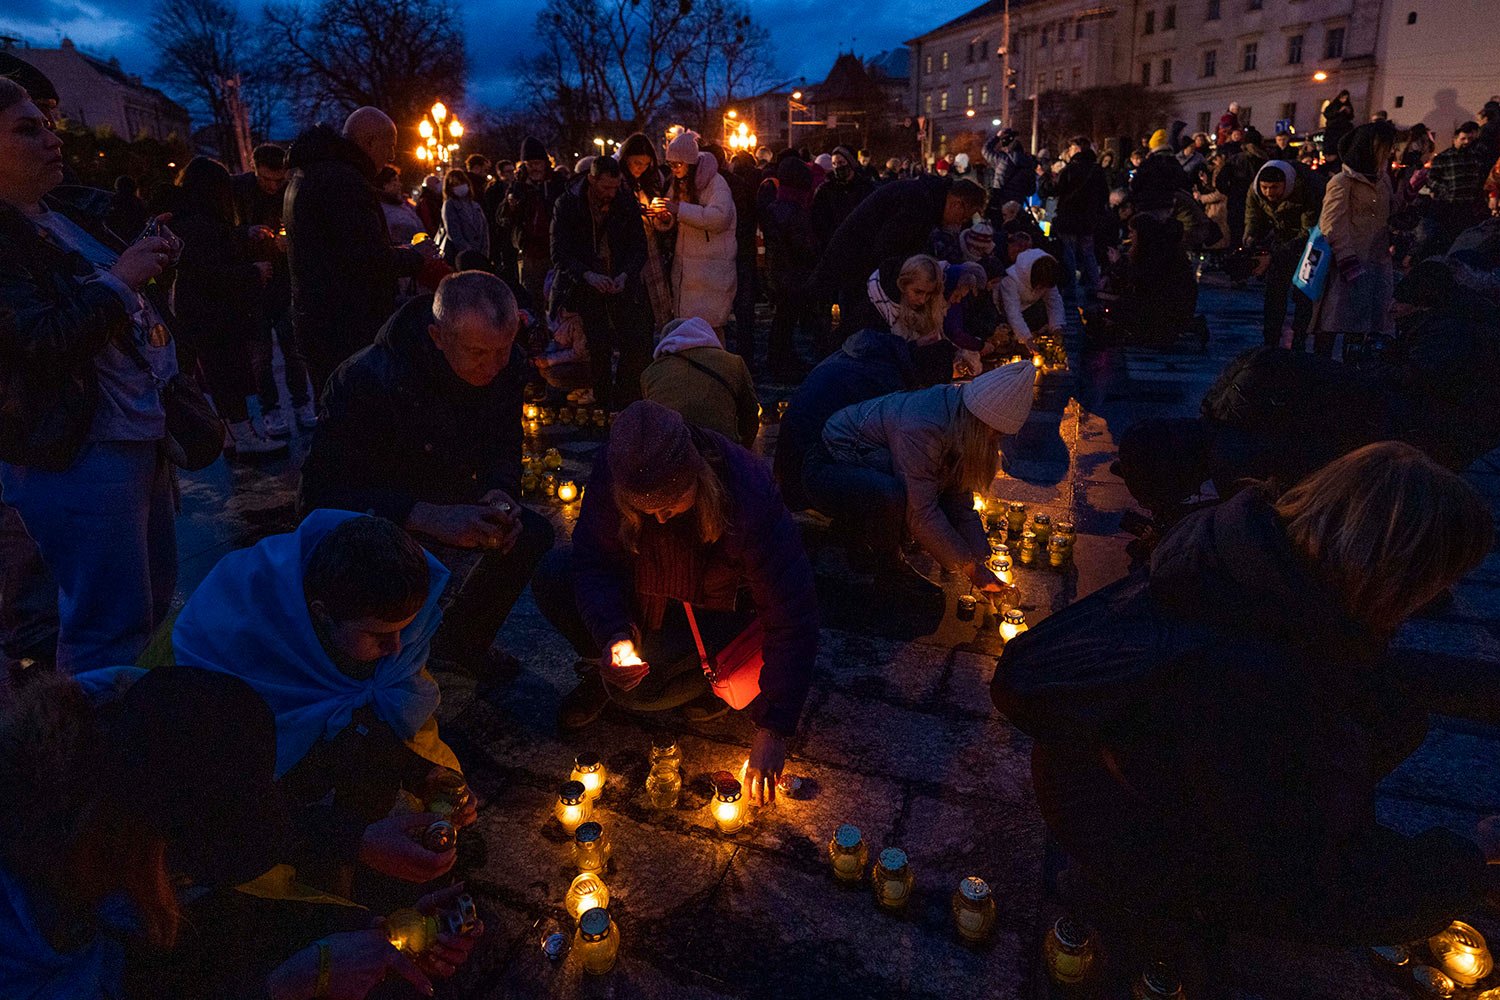  People light candles forming the shape of Ukraine's map, in memory of those who have died, in front of the Taras Shevchenko monument, in Lviv, western Ukraine, Tuesday, April 5, 2022. (AP Photo/Nariman El-Mofty) 